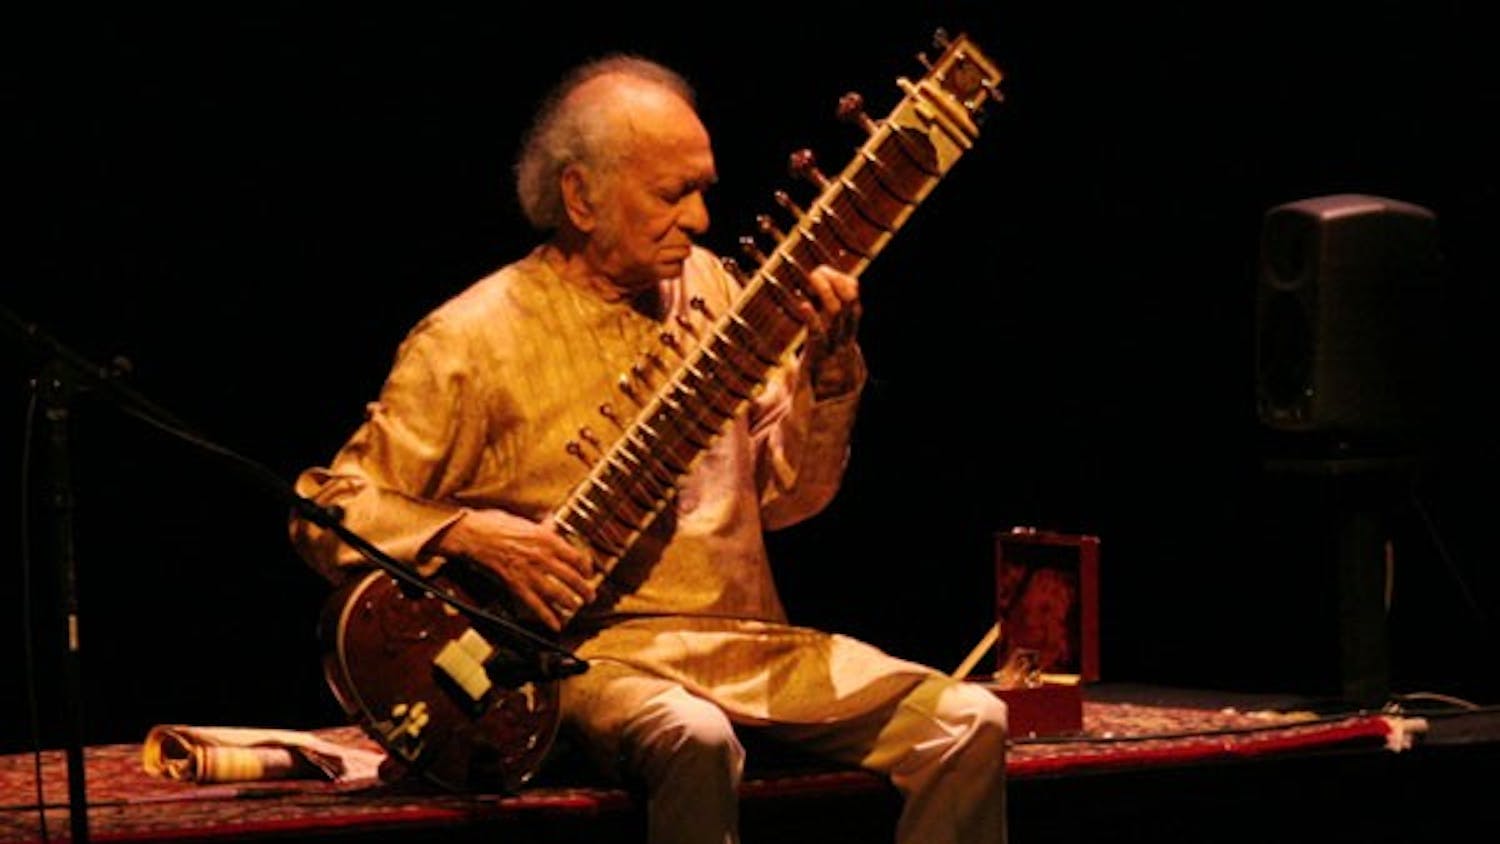 Ravi Shankar, a legendary musician from India, entertained a sold-out audience at Memorial Hall. DTH/Reyna Desai